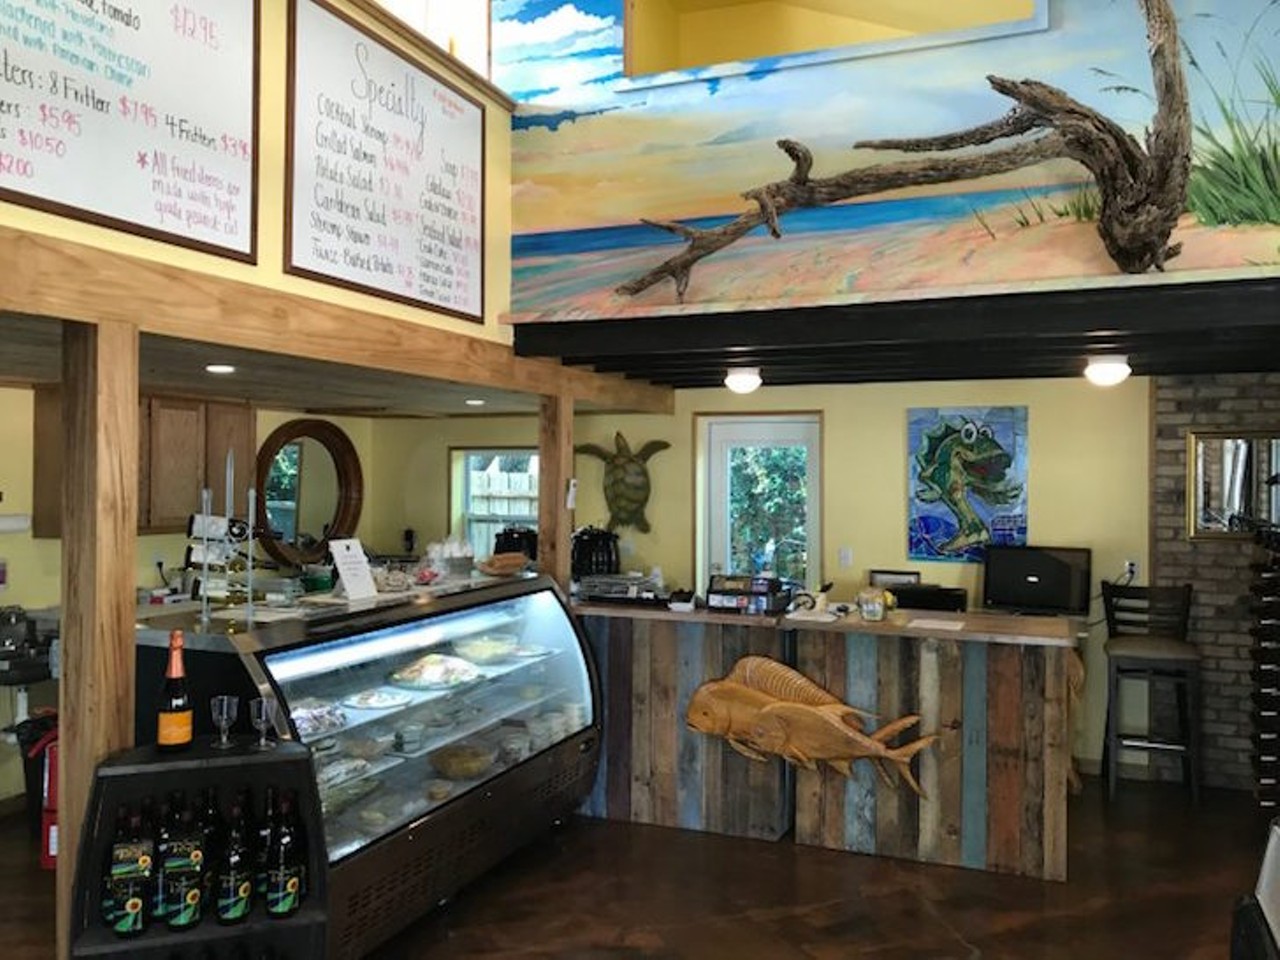 Jensen Brother's Seafood    
911 Douglas Ave, Dunedin, FL 34698,  (727) 735-0755 
Jensen Brother&#146;s Seafood, a popular wholesale seafood market, recently opened up Carver&#146;s Fish House next door, where you can eat their freshly caught seafood in house. Its relaxing, porch seating is the perfect place to slam shrimp cocktails and beer. 
Photo via Jensen Brother's Seafood /Facebook